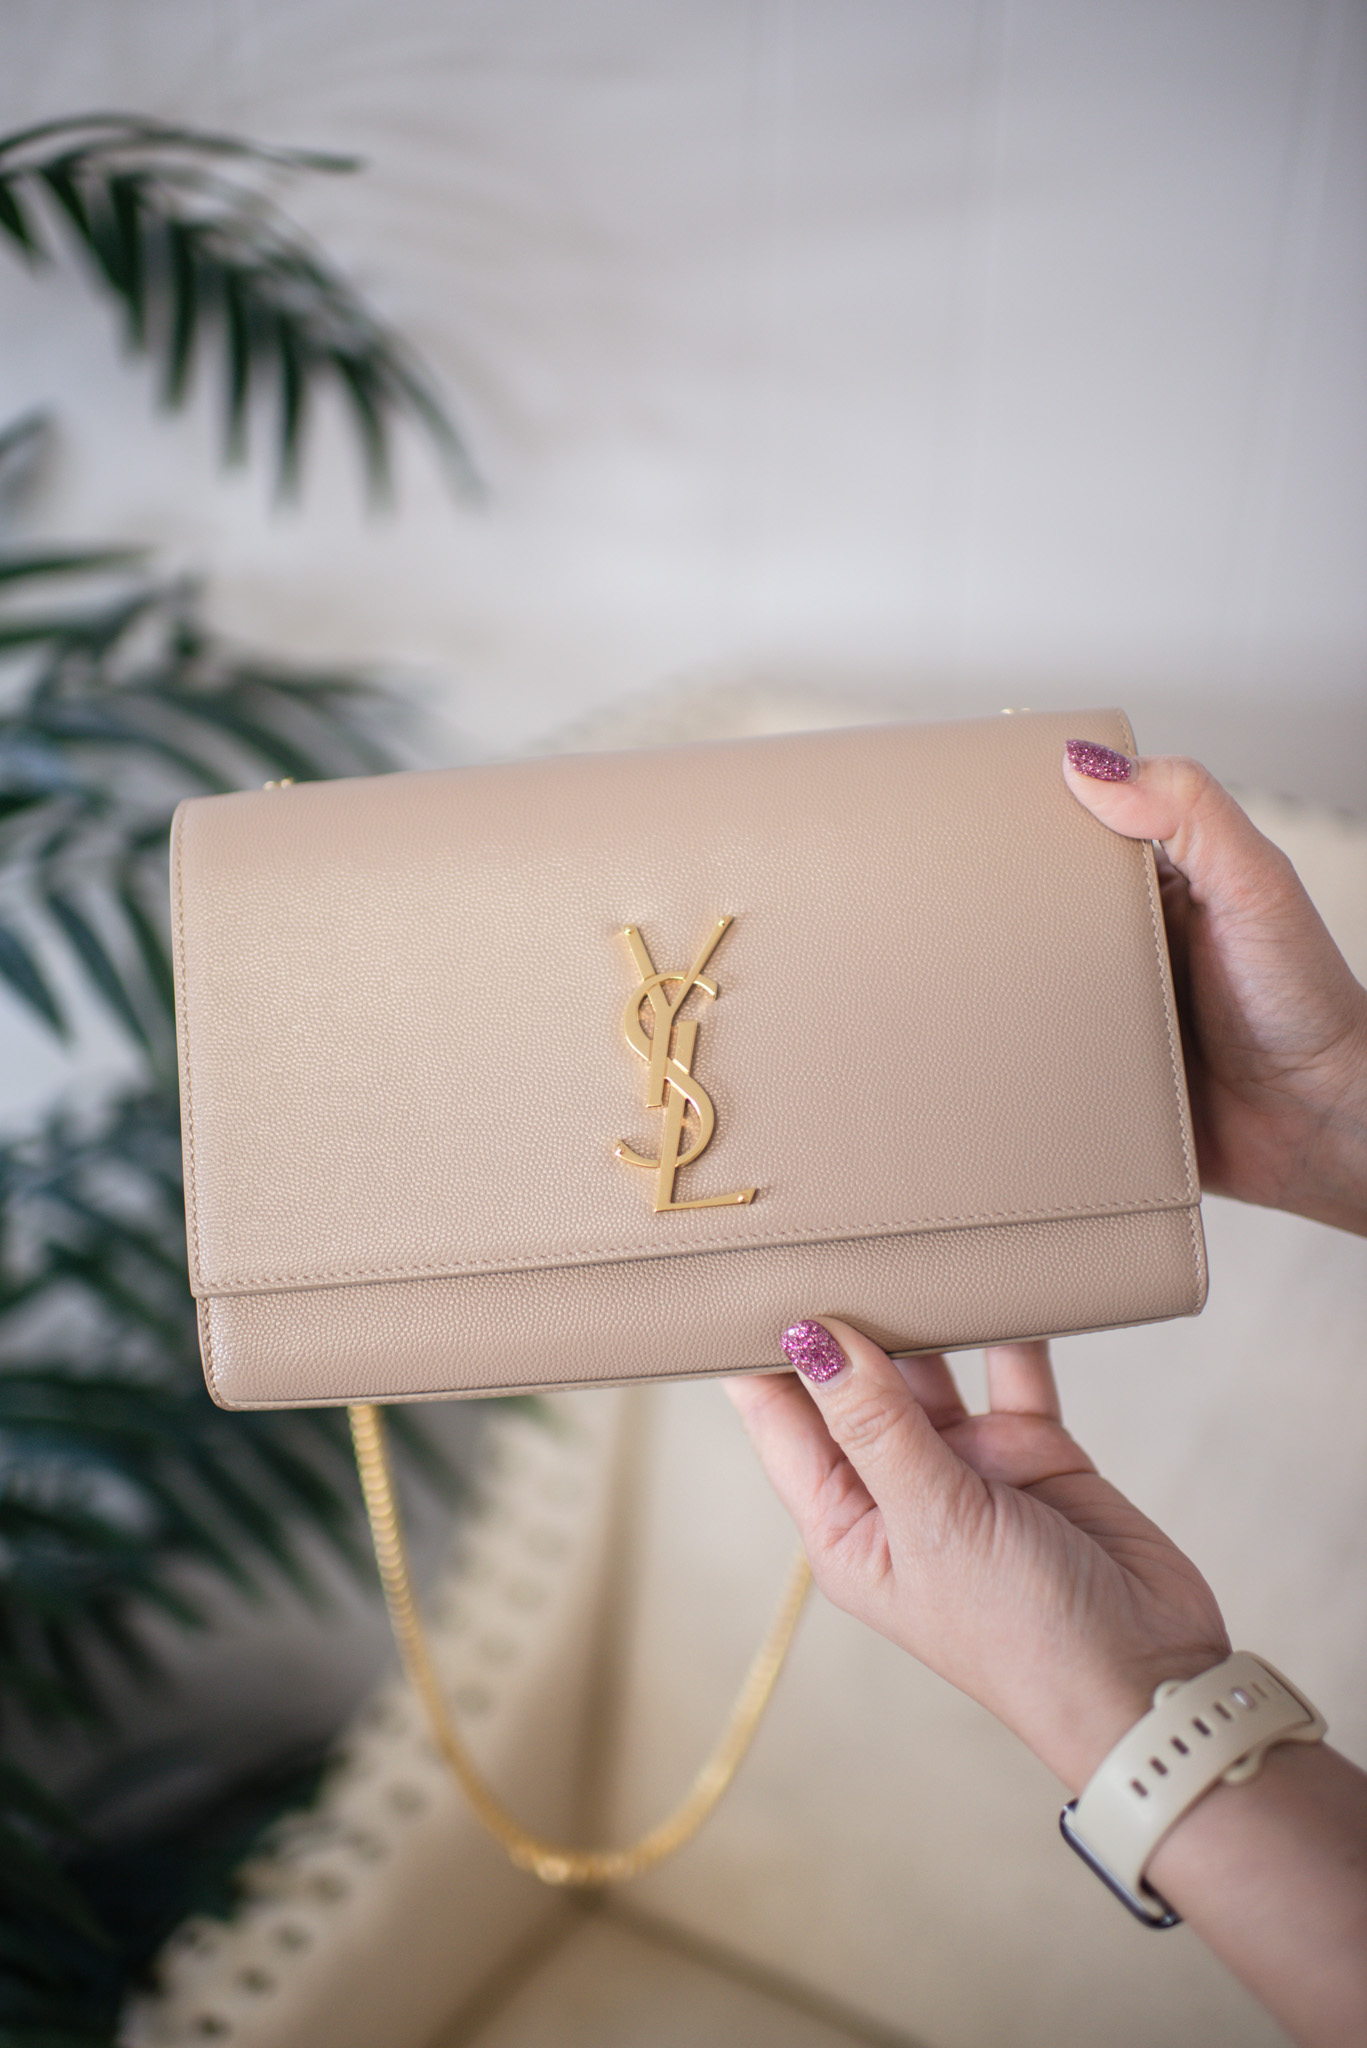 YSL BLOGGER BAG: FULL REVIEW / What fits inside & How to get a